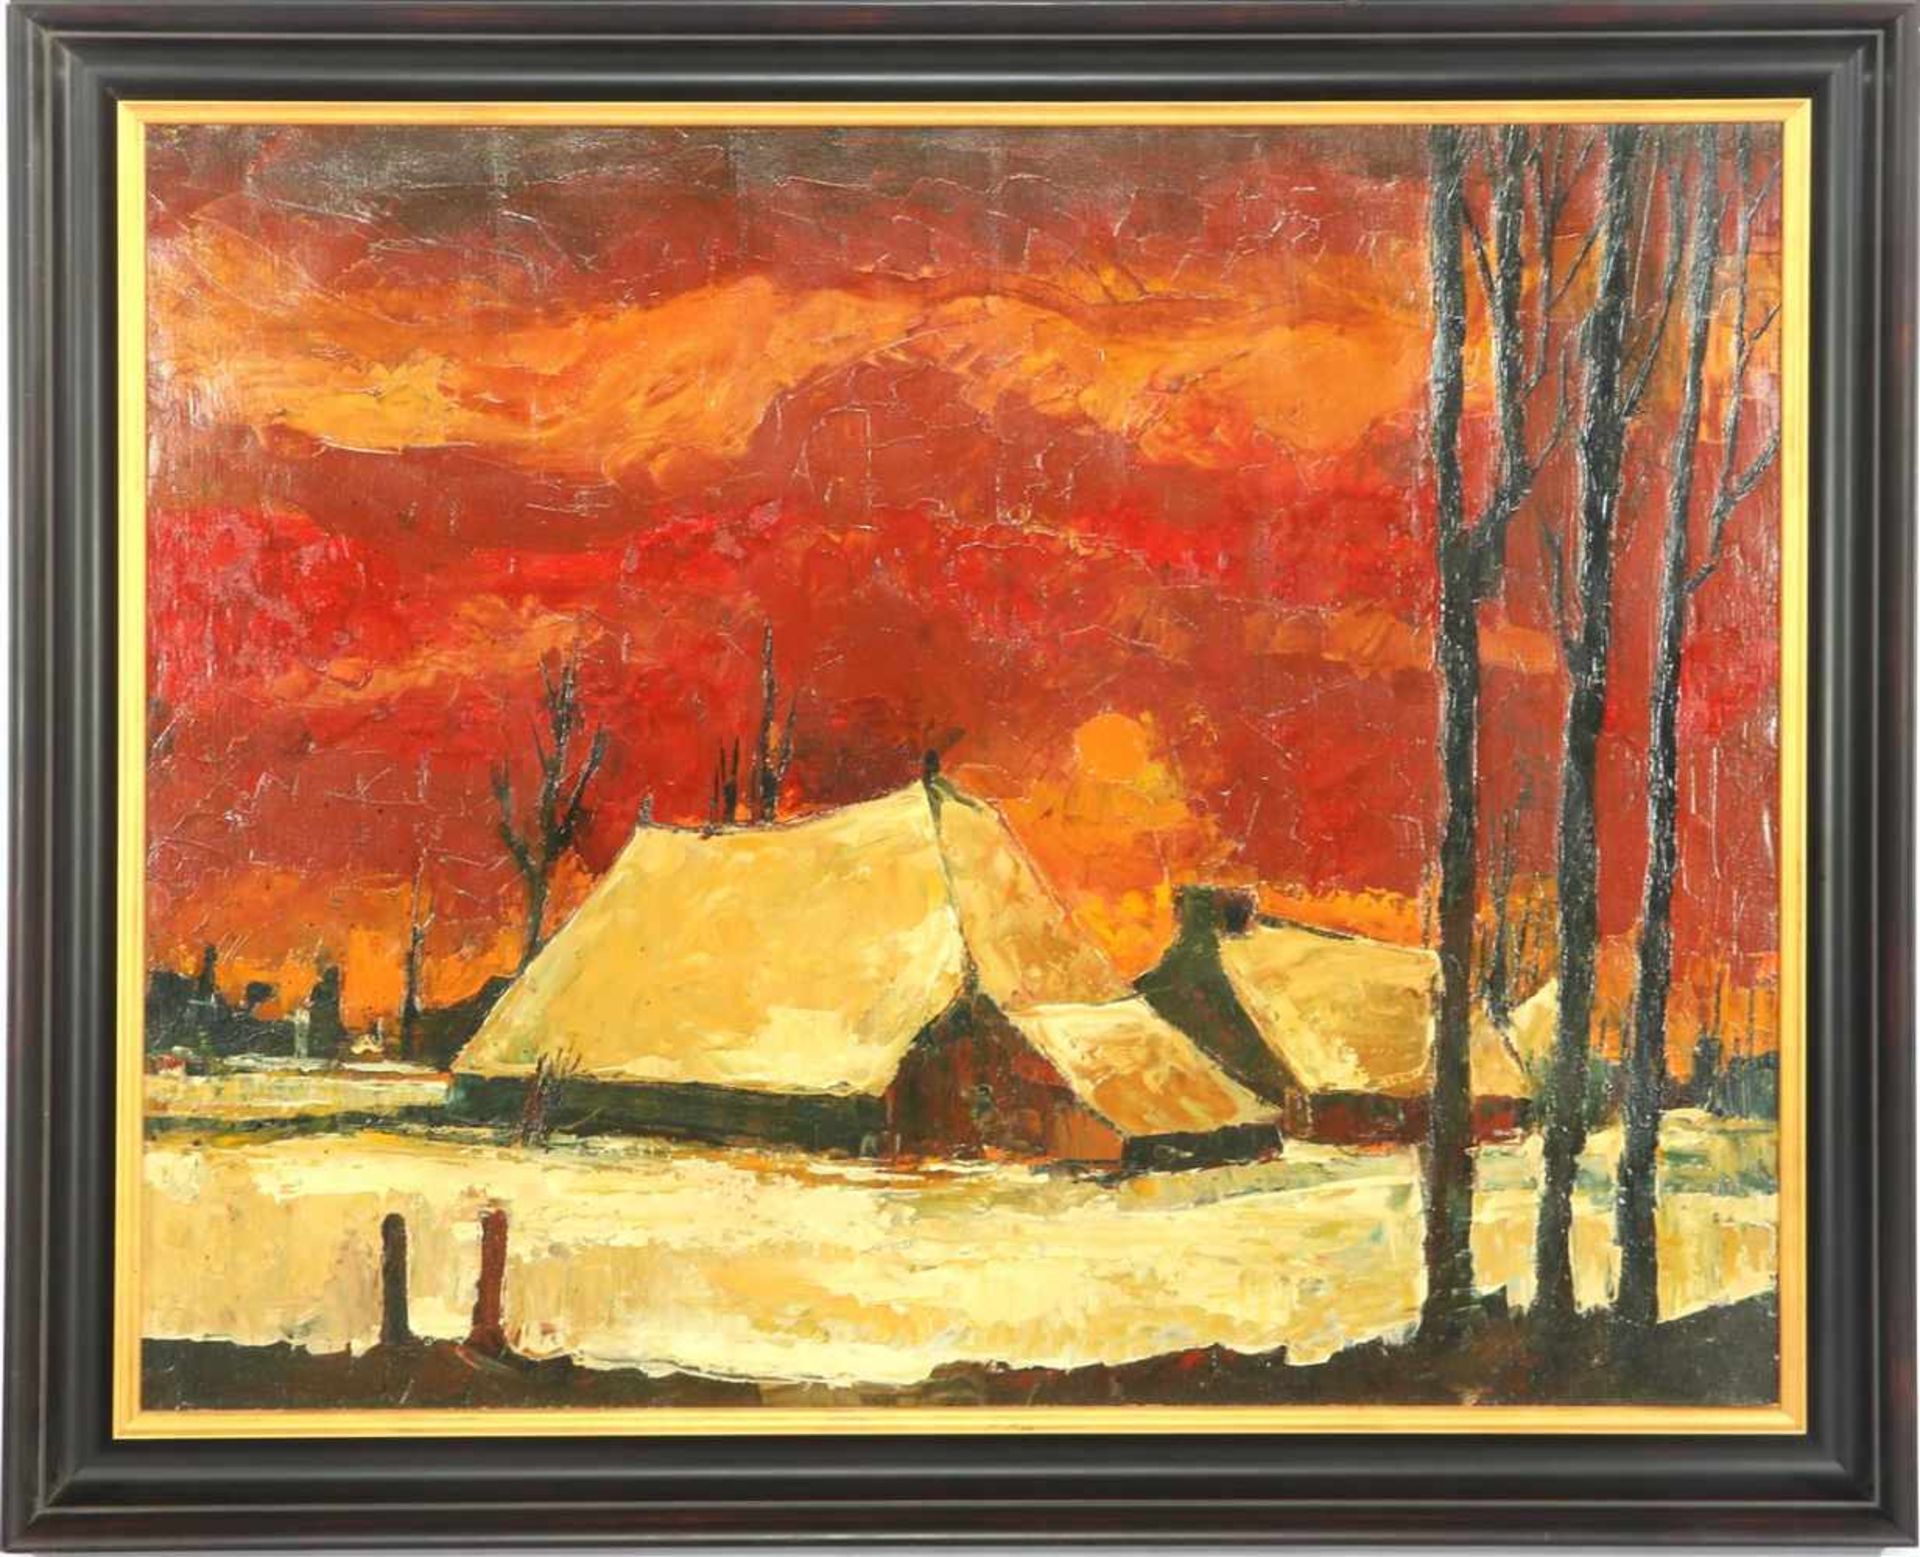 Leon Goossen, Expressionist landscape, canvas from 1971, 80x100 cm